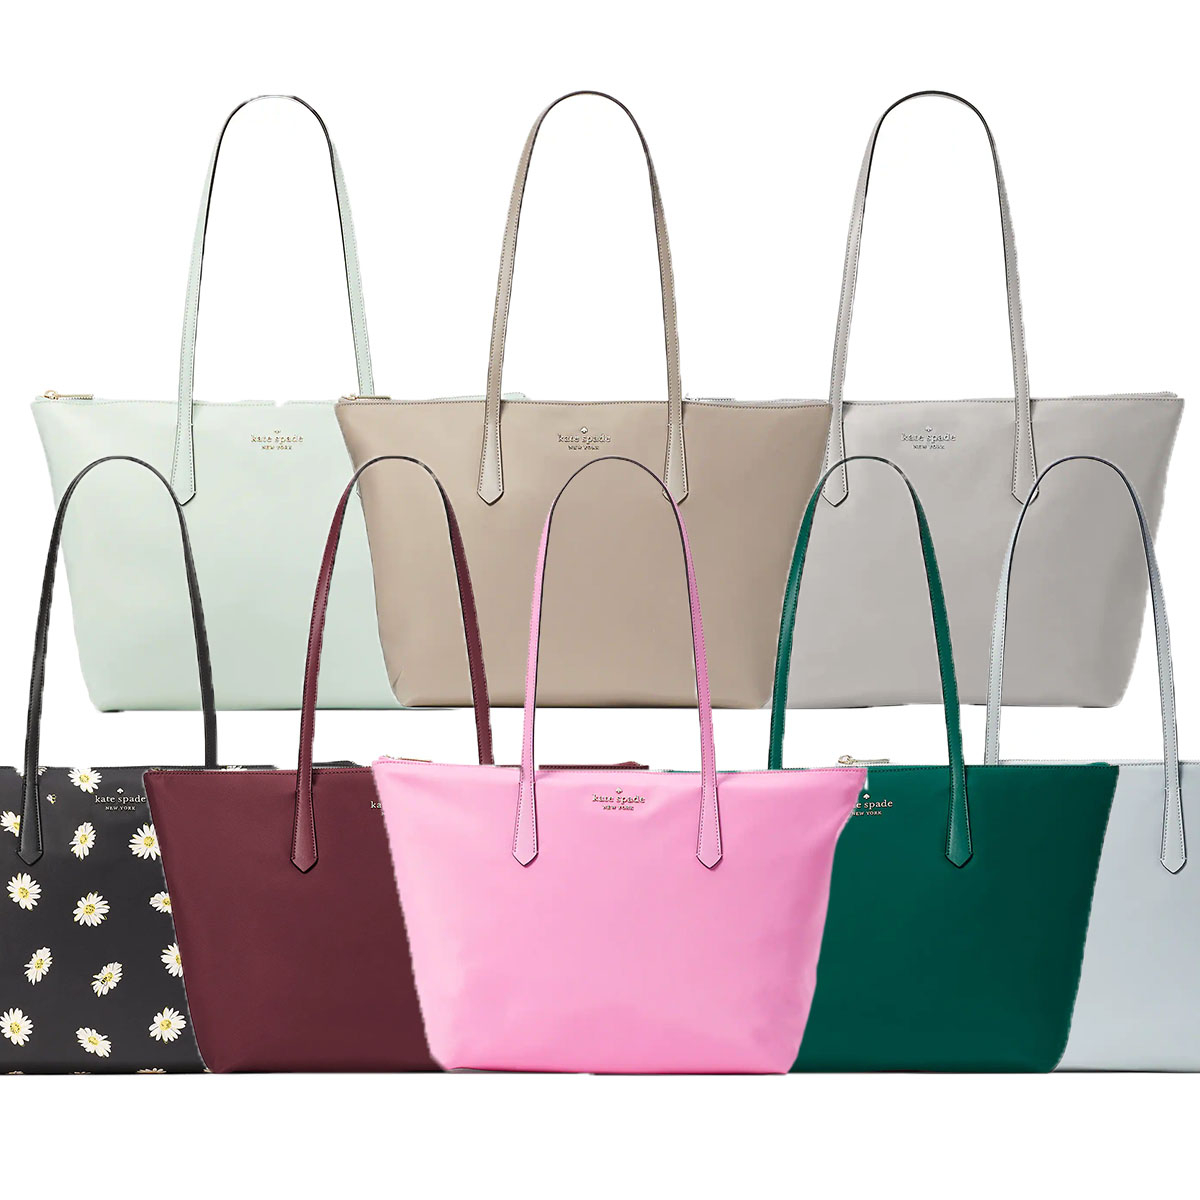 Kate Spade 24-Hour Flash Deal: Get This $300 Tote Bag for Just $75